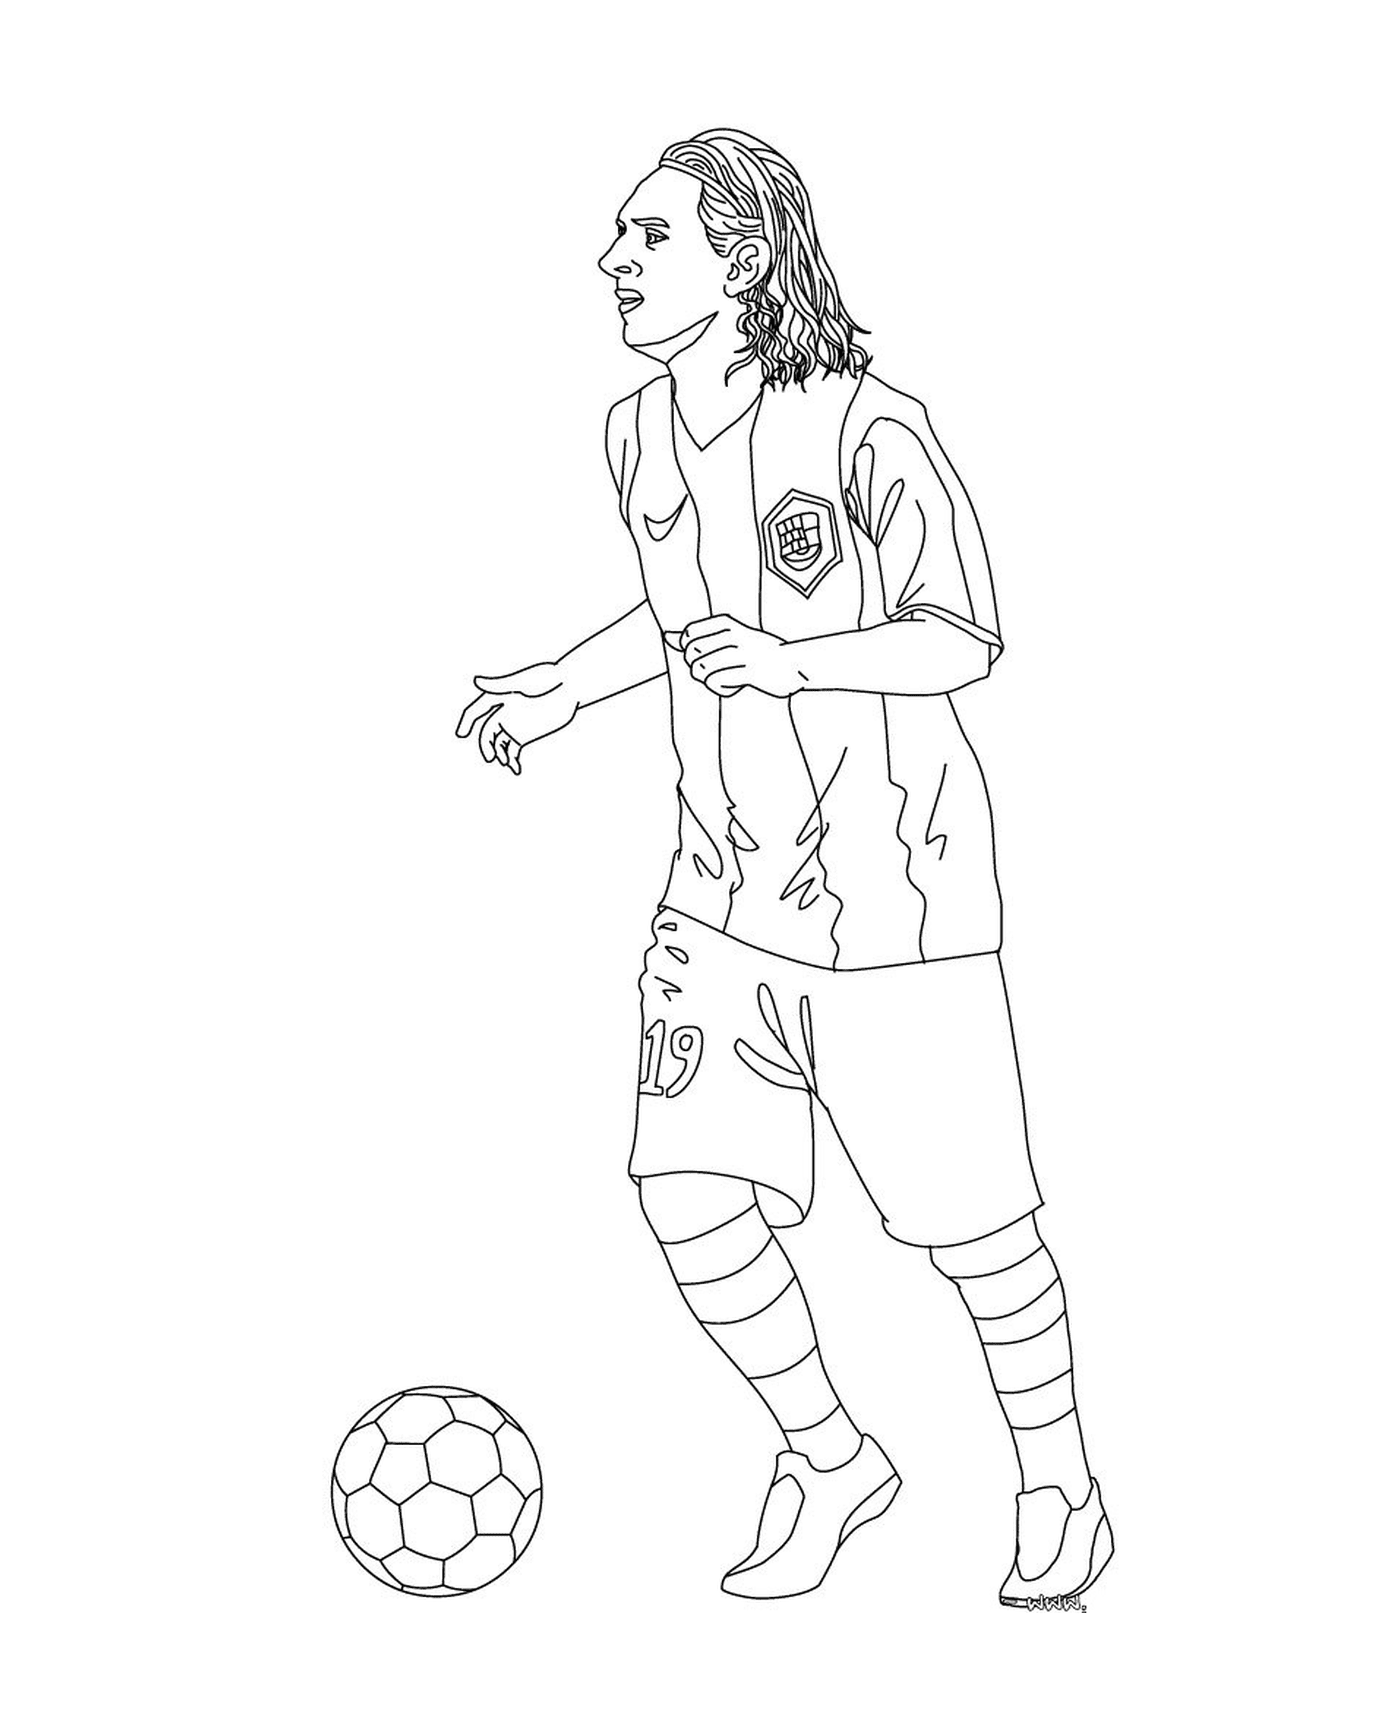  A football player with a football 